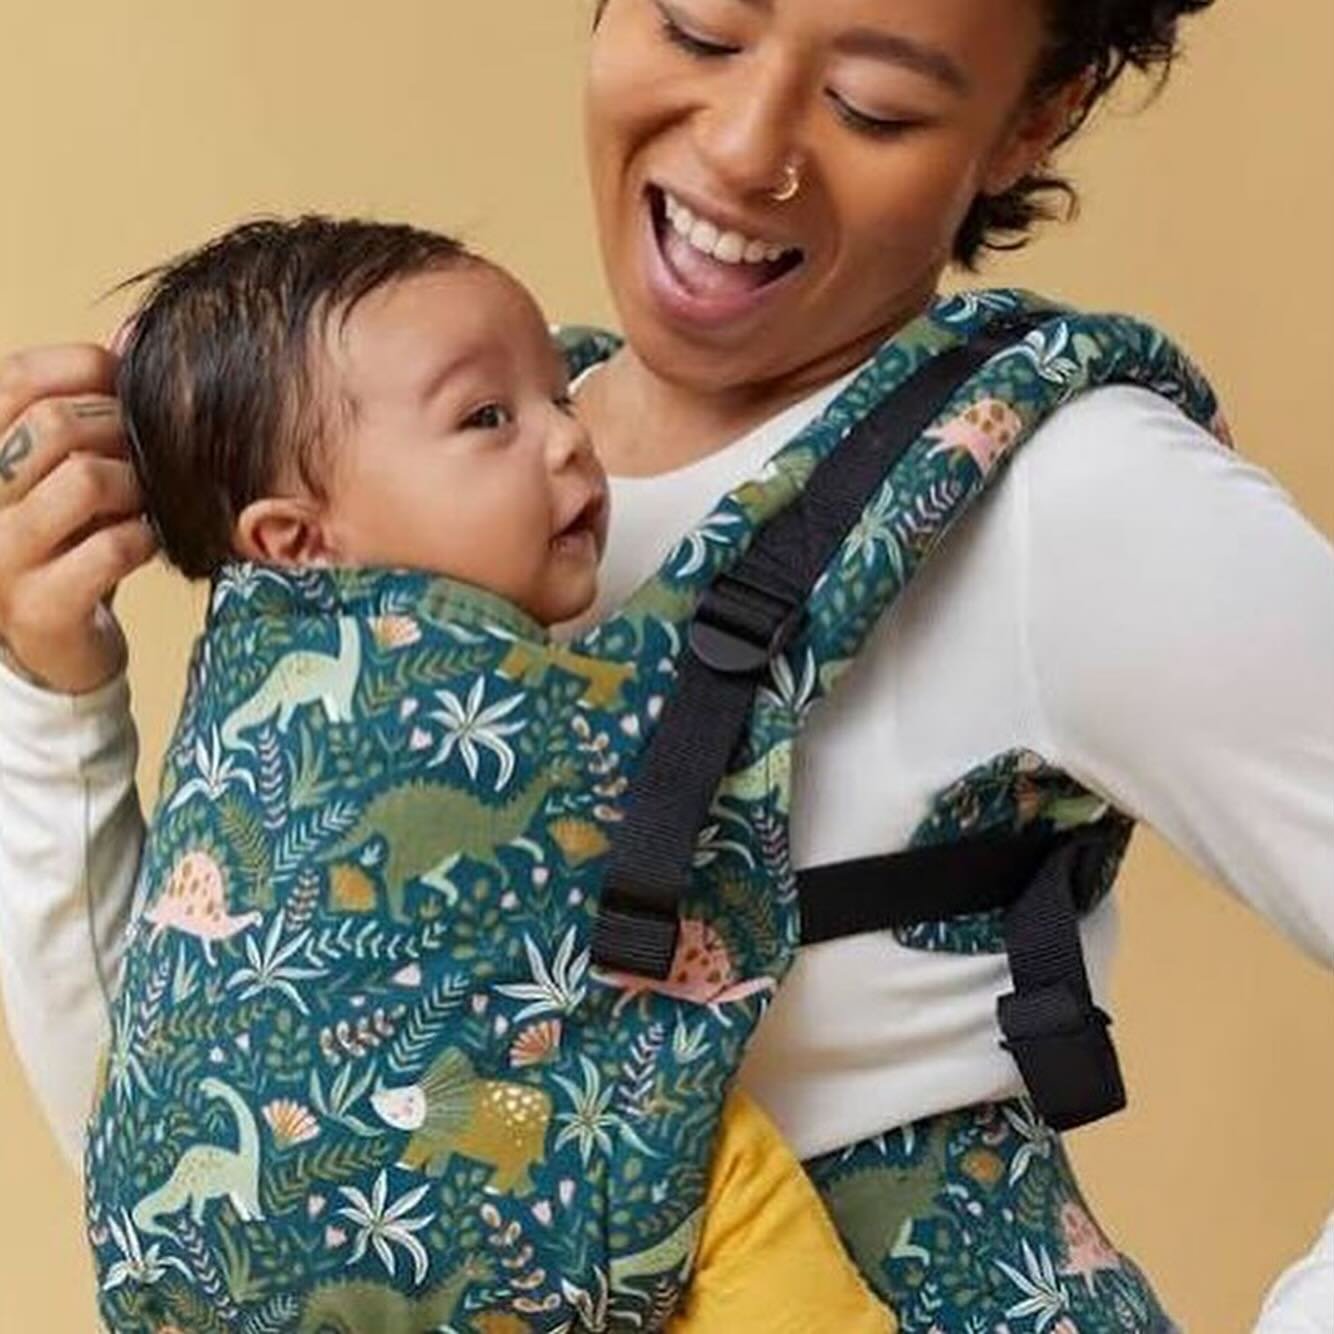 Turns out owning a sling is actually a real privilege, at a recent workshop we hosted a Mama said &ldquo;I wish I&rsquo;d been able to afford one for my first daughter&rdquo;. We donated a fabric wrap sling for her newborn 2nd little girl 🫶🏼

Pleas